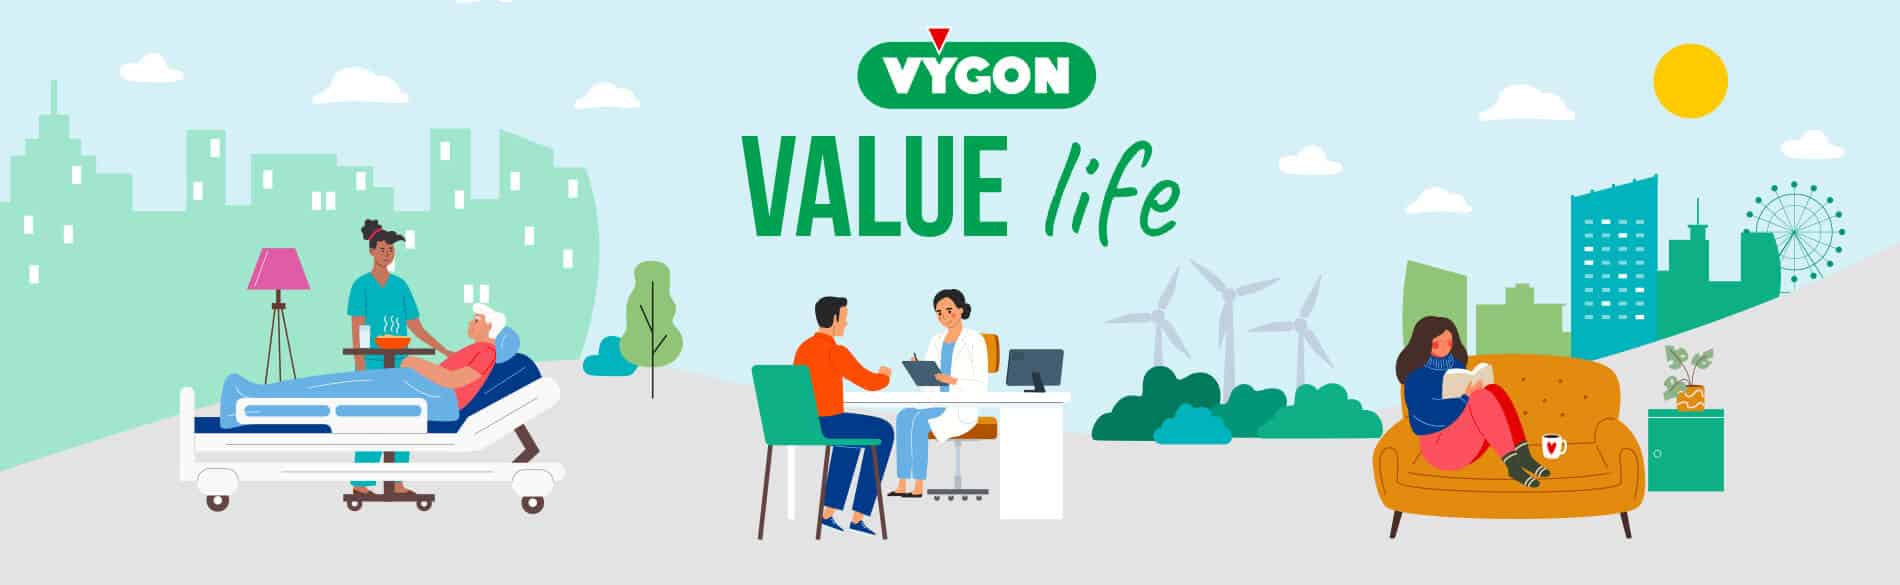 vygon value life main banner